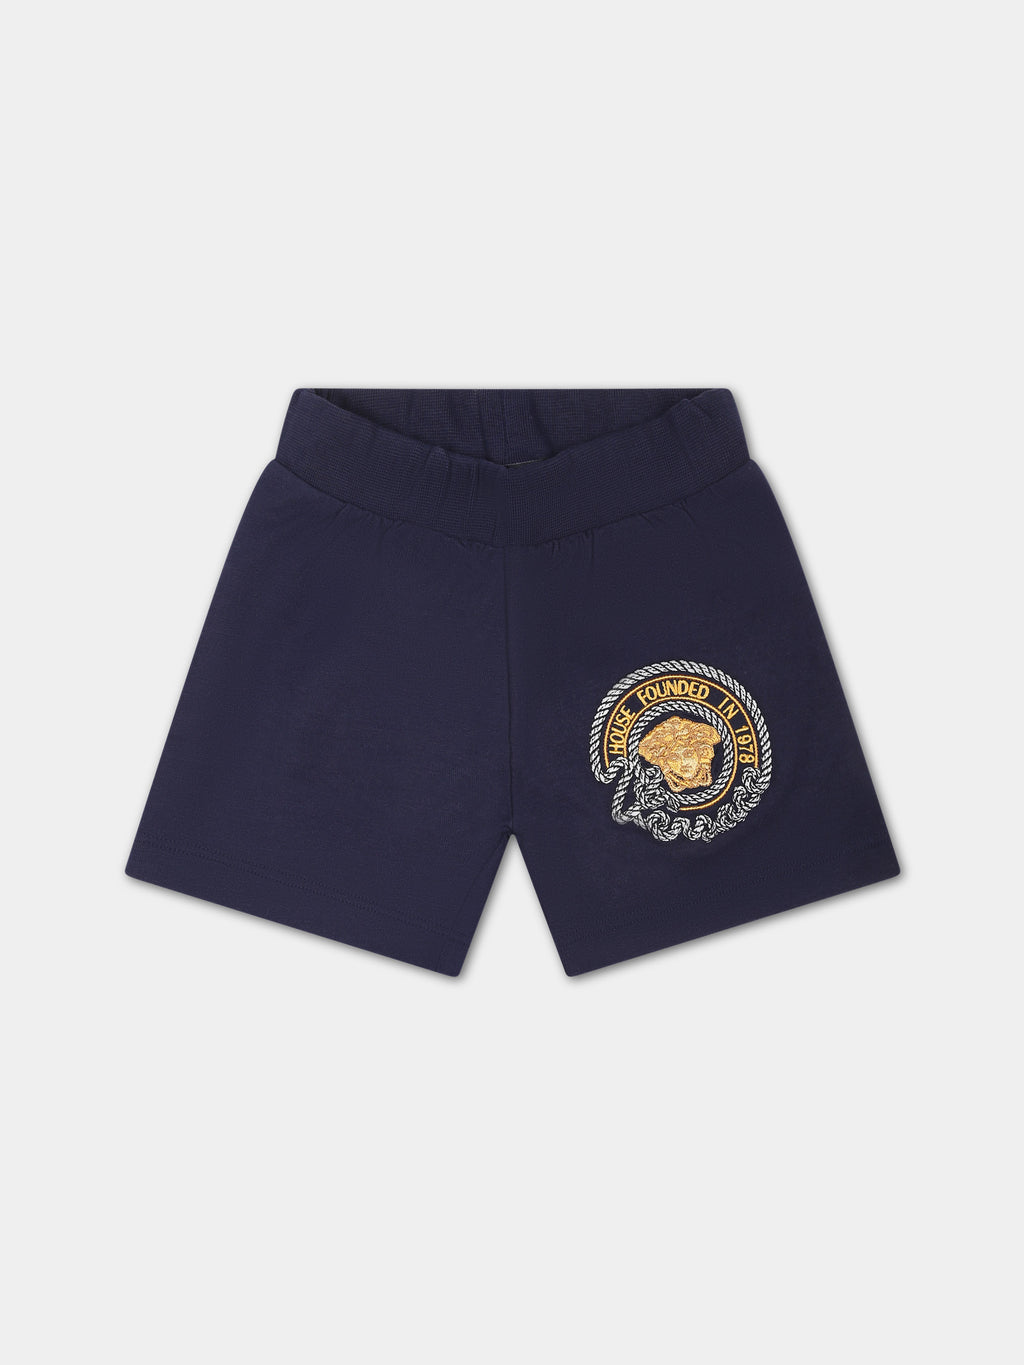 Blue shorts for baby boy with Medusa